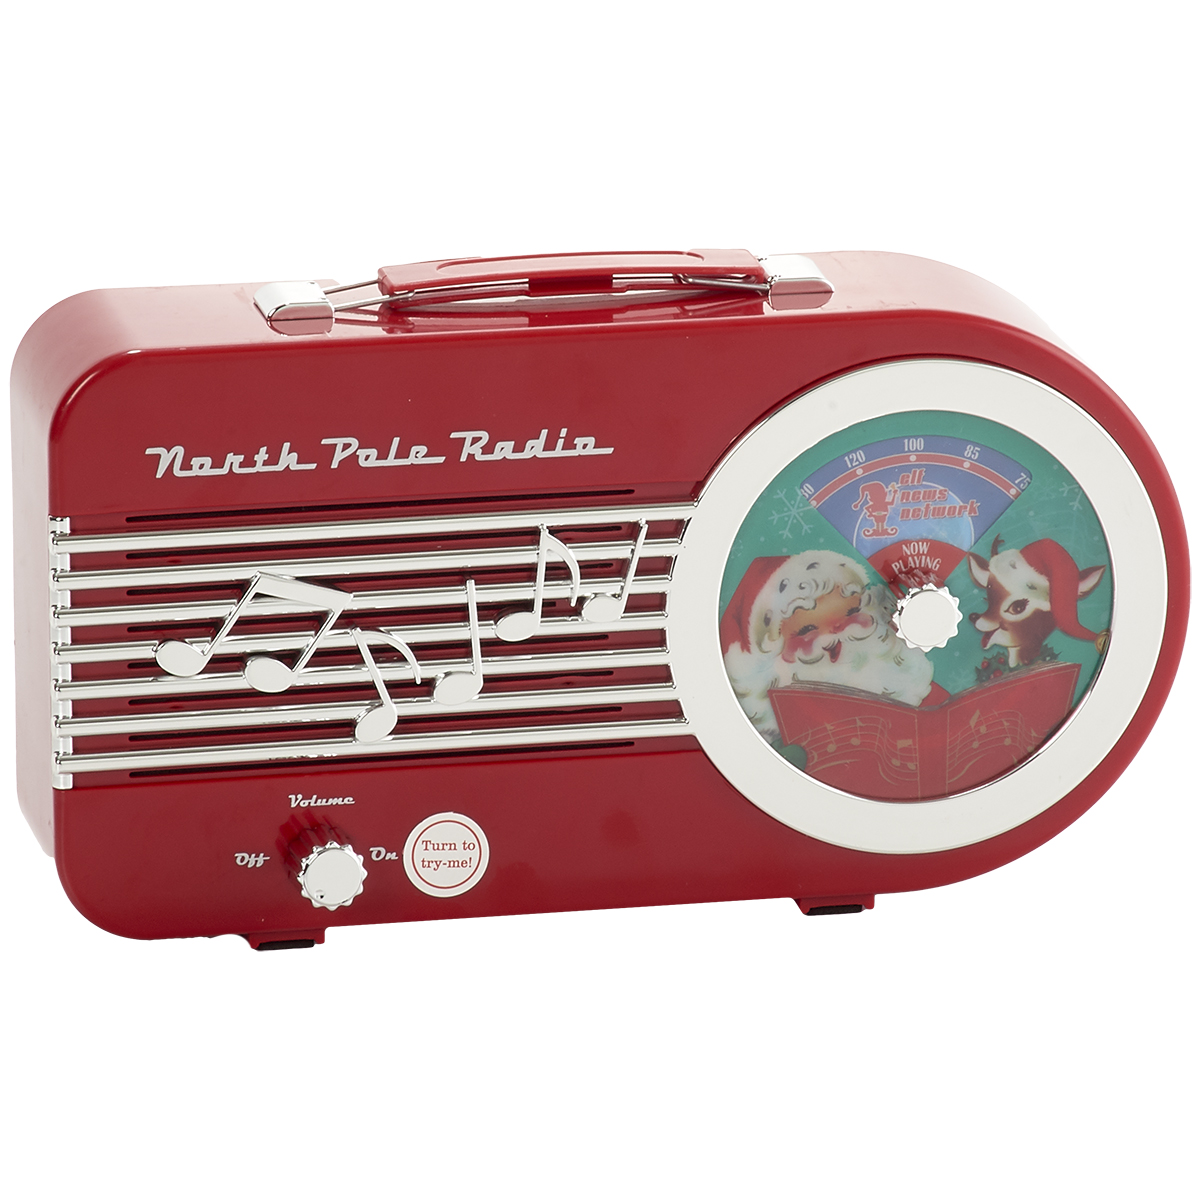 Mr. Christmas(R) 10.5in. North Pole Radio - Red